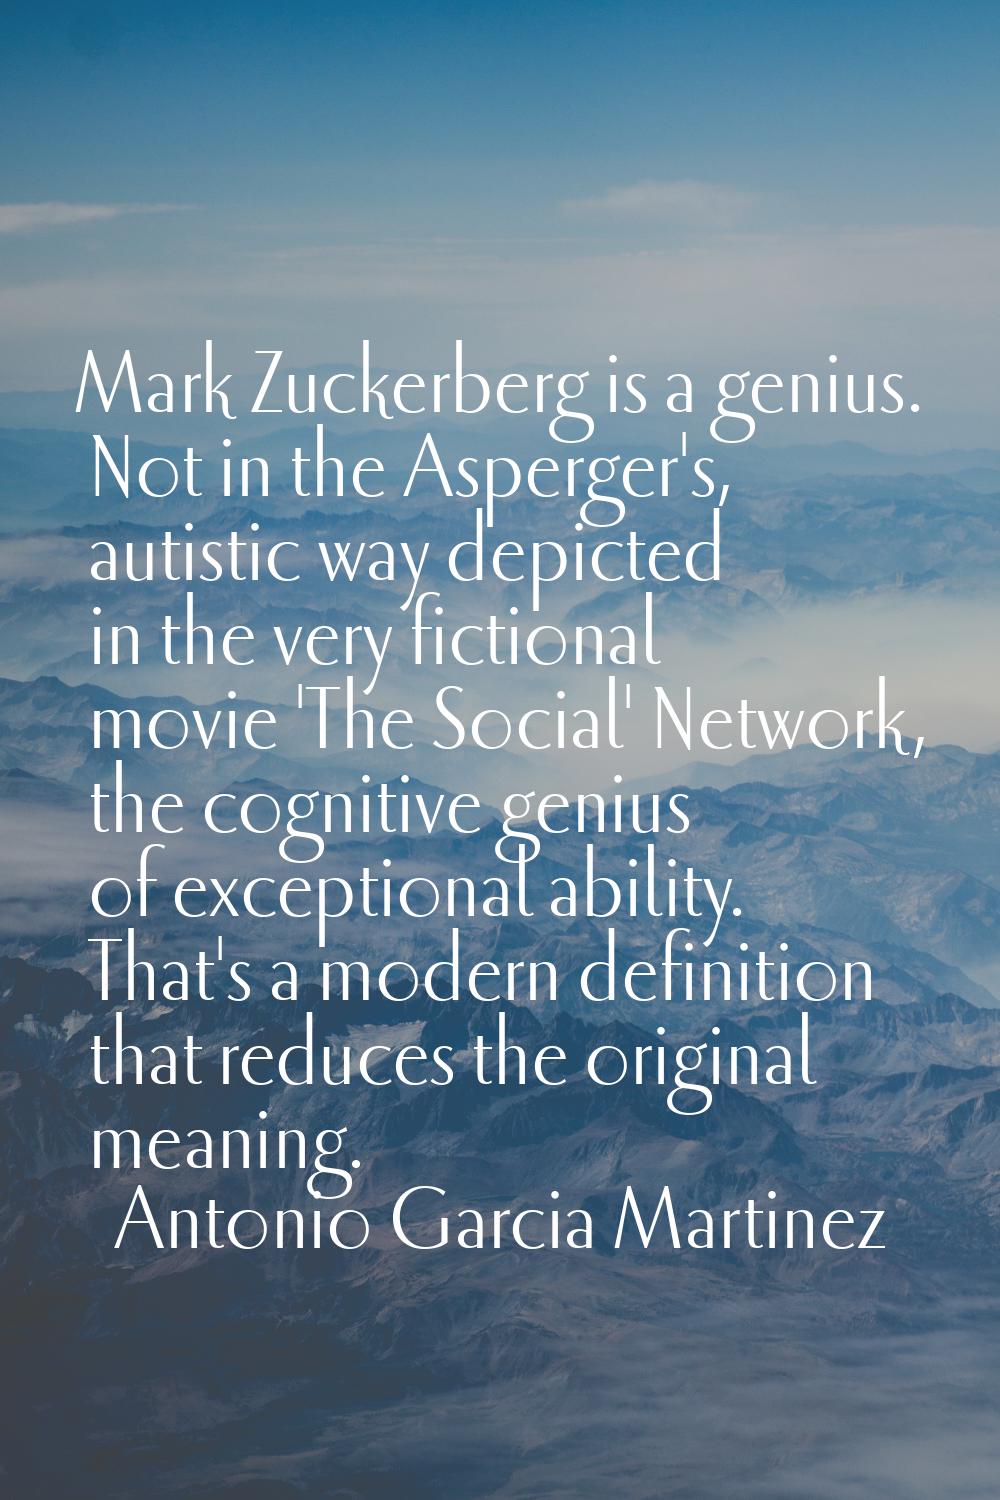 Mark Zuckerberg is a genius. Not in the Asperger's, autistic way depicted in the very fictional mov